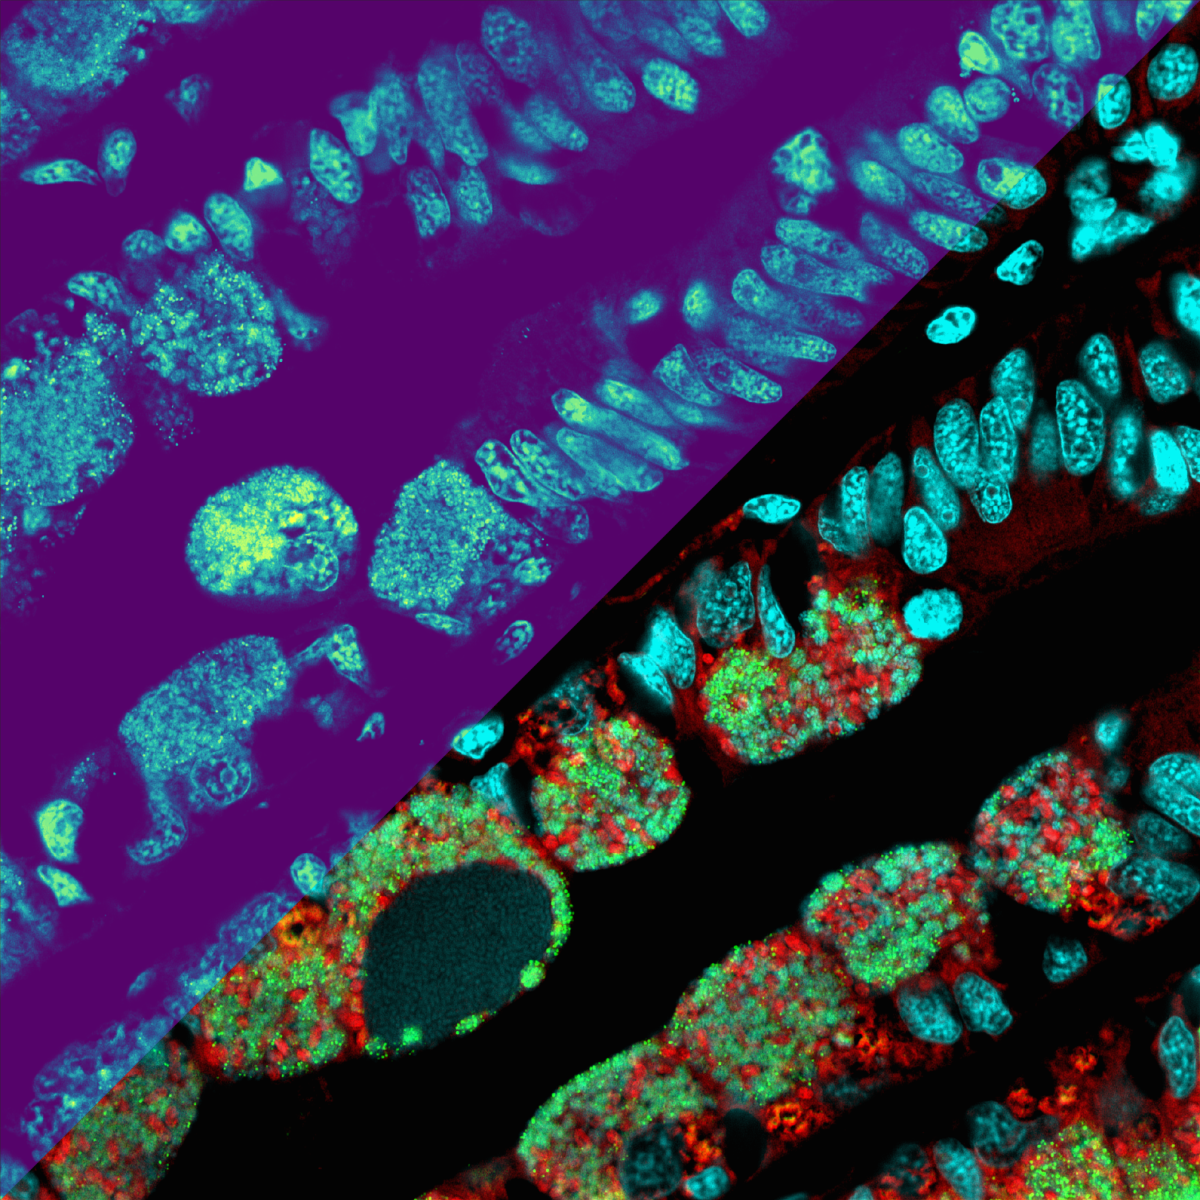 Metabolite distributions shown as a heatmap on the upper left part of the picture: The brighter the color, the higher the metabolite concentration (microscopy-MSI mockup for illustration). The lower right side of the picture displays microscopic details of the microbes (in red and green) and the mussel’s nuclei (cyan). (© Max Planck Institute for Marine Microbiology / B. Geier)